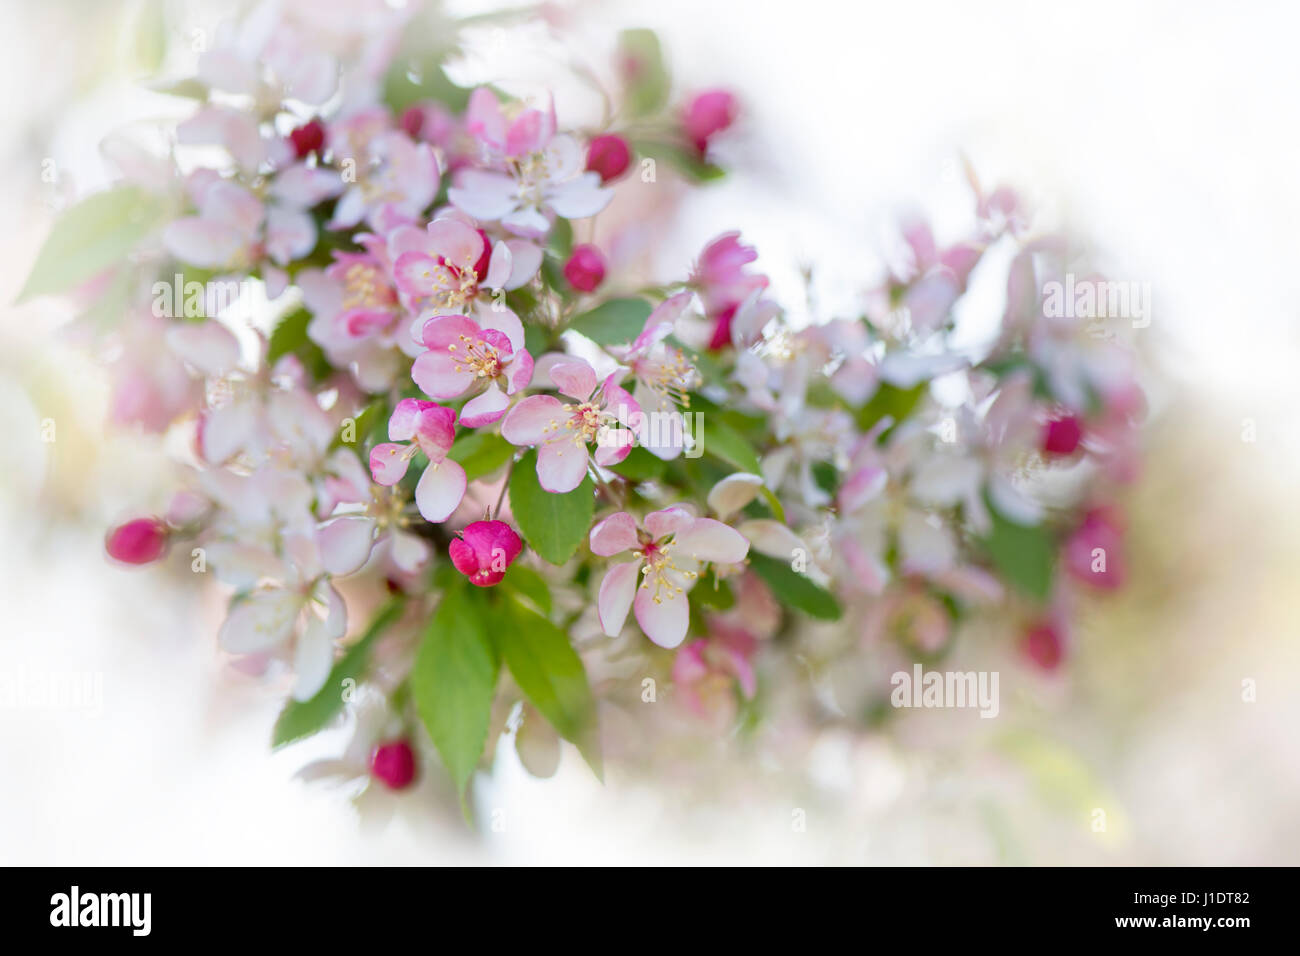 Close-up image of the pretty spring blossom pink and white flowers of the Japanese Crab apple tree - Malus floribunda Stock Photo